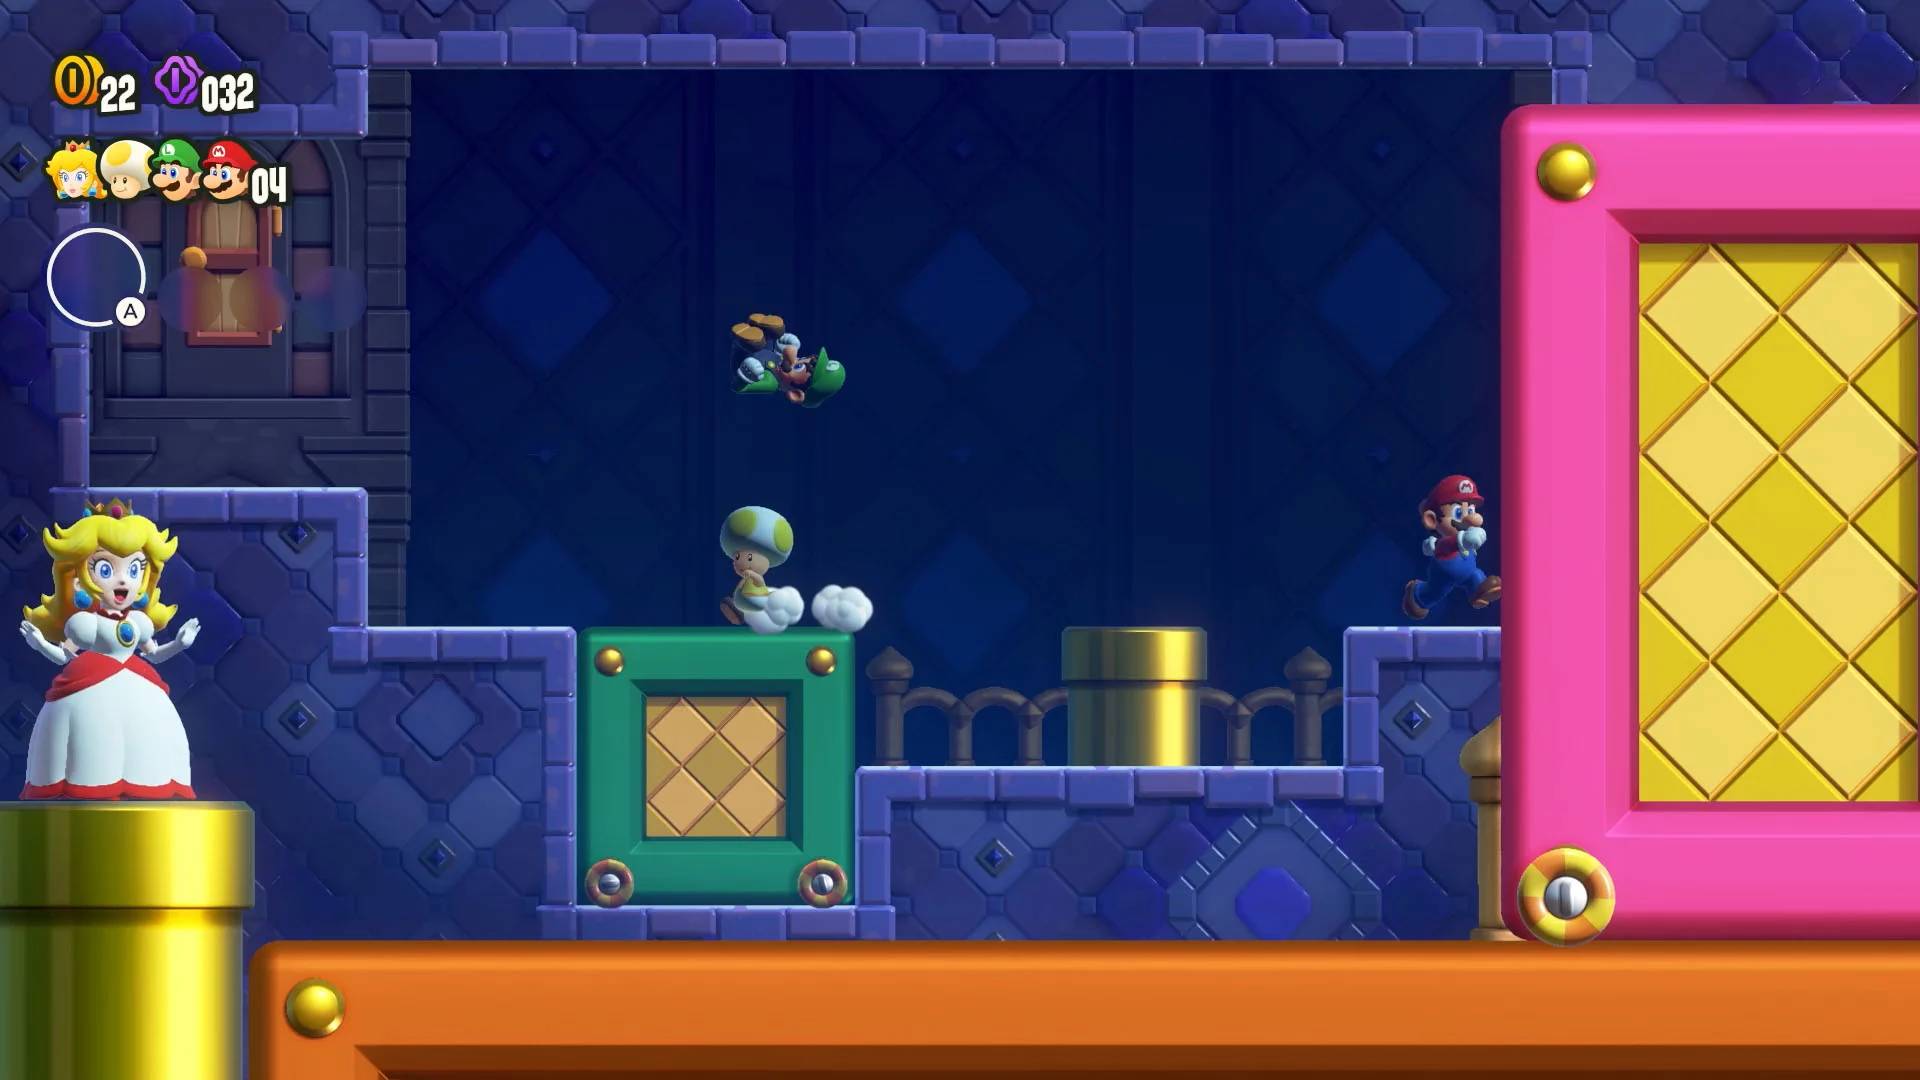 Review: 'Super Mario Bros. Wonder' delivers by defying expectations